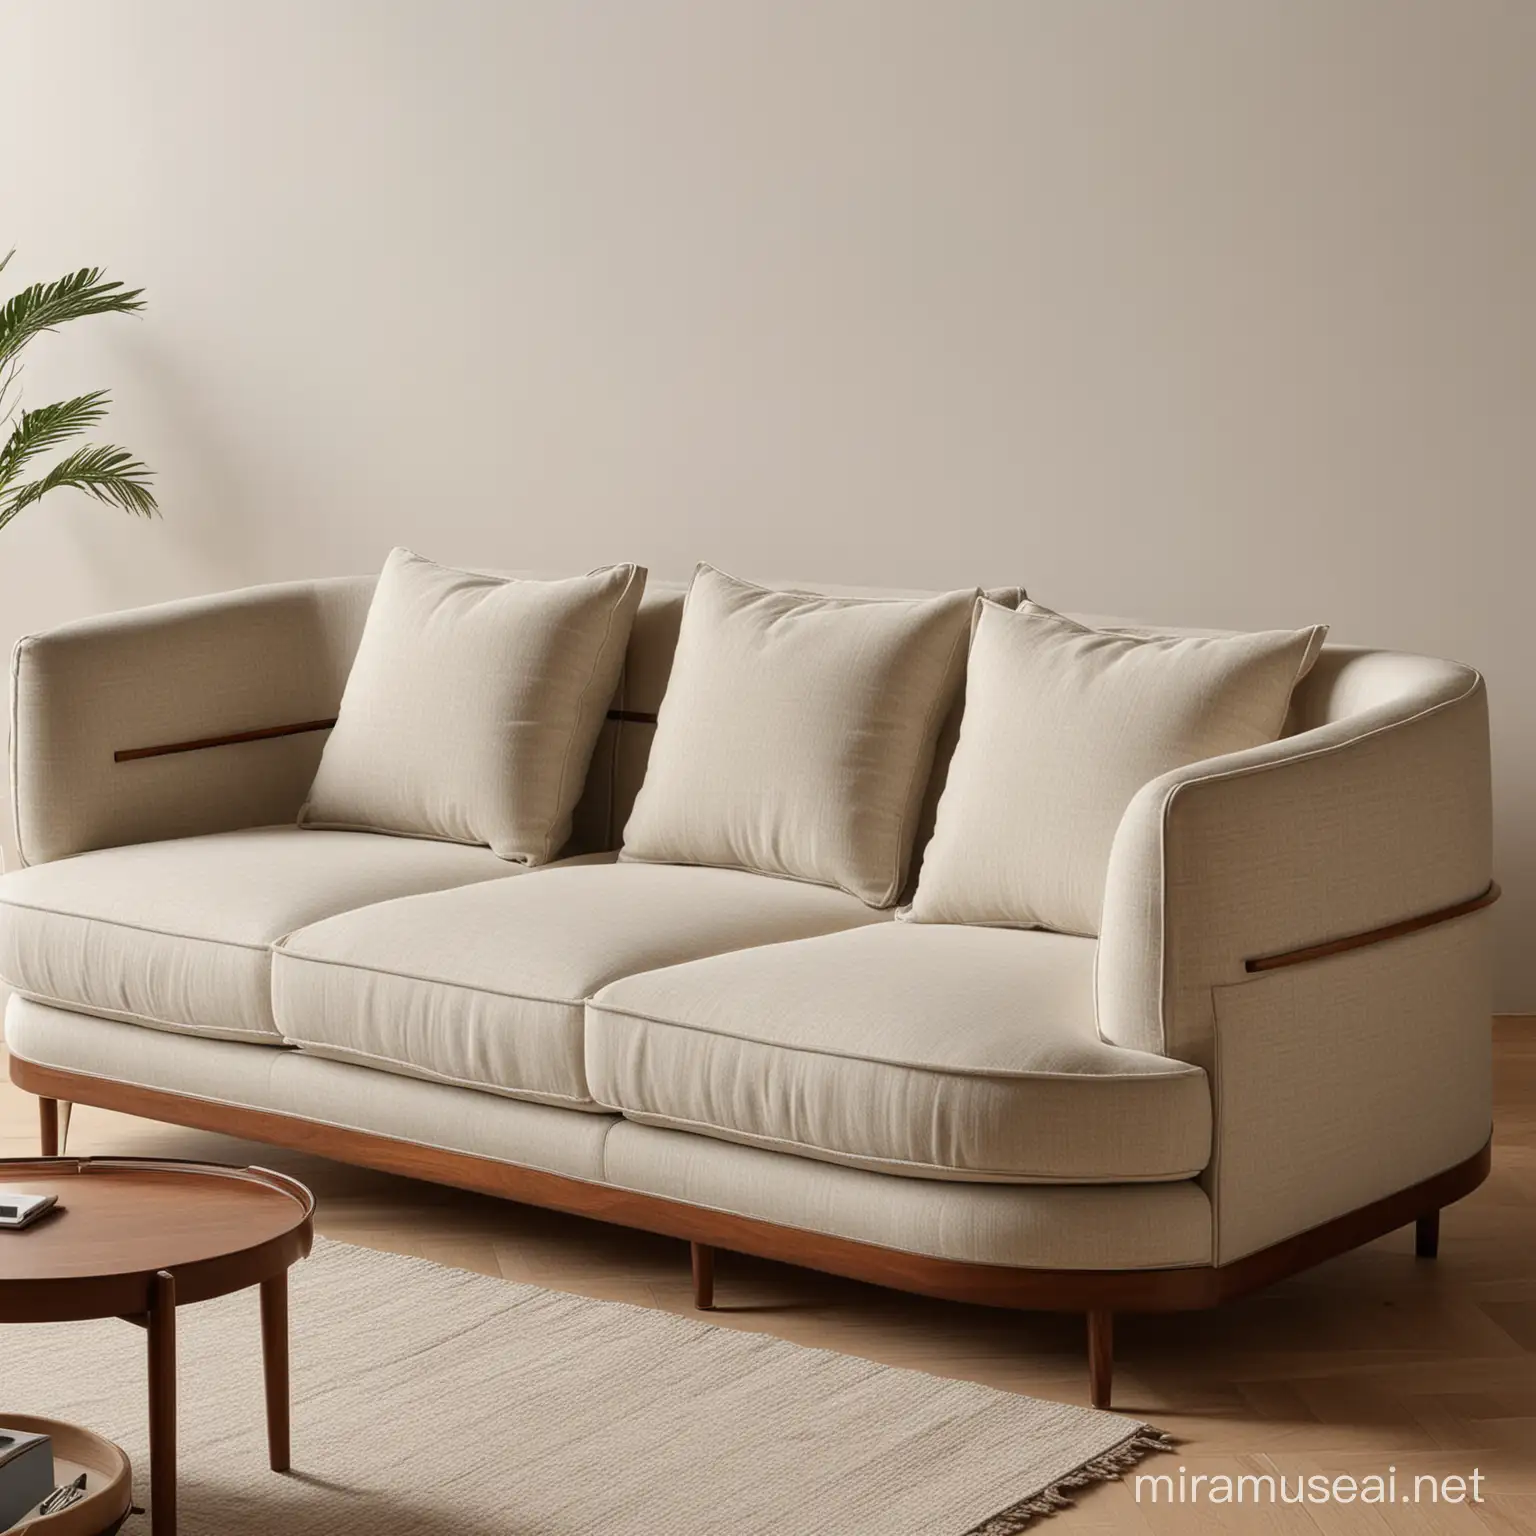 Home decoration, 3-seat sofa, new fabric color, small wooden detail, small arm,view when sitting, Have a very small amount of wood on the edge of the arm,quality wood and paint workmanship,sofa with slightly oval lines,Producible and great looking armrest,useful seating group with geometric lines,
 terry linen fabric, back height 76 cm, arm functional, 2-piece appearance on the back, puzzle sofa,fold in the arm towards the seat,Cinema between modular sofa consisting of 2 separate, front side and back view,interiordesignaddict,get3differentimages,side and top view, round lines,3-seat sofa set, new fabric, small wooden detail,small arm view when sitting,terry linen fabric,Cinema between modular sofa consisting ,Producdaily,homedecor,aidesign,visual,visualart,digitalart,setdesign,rendertrends,renderarchitecture,architecture,architecturephotography,architecture_best,architecture_lovers,furnitureart,architecturestudents,architecturaldigest,architecturevisualization,architectureape,finearchitecture,architecturetravel,architecturebuilding,renderlovers,interiordesignerslife,interiordesigninspiration,interiordesigntrends,interiordesignblog,interiordesignersofinstagram,interiordesignerlife,interiordesignblogger,interiordesignlover,interiordesignmag,interiordesignaddict,midjourney,sofadesign,armchairdesign,black,get3differentimages,side and top view!